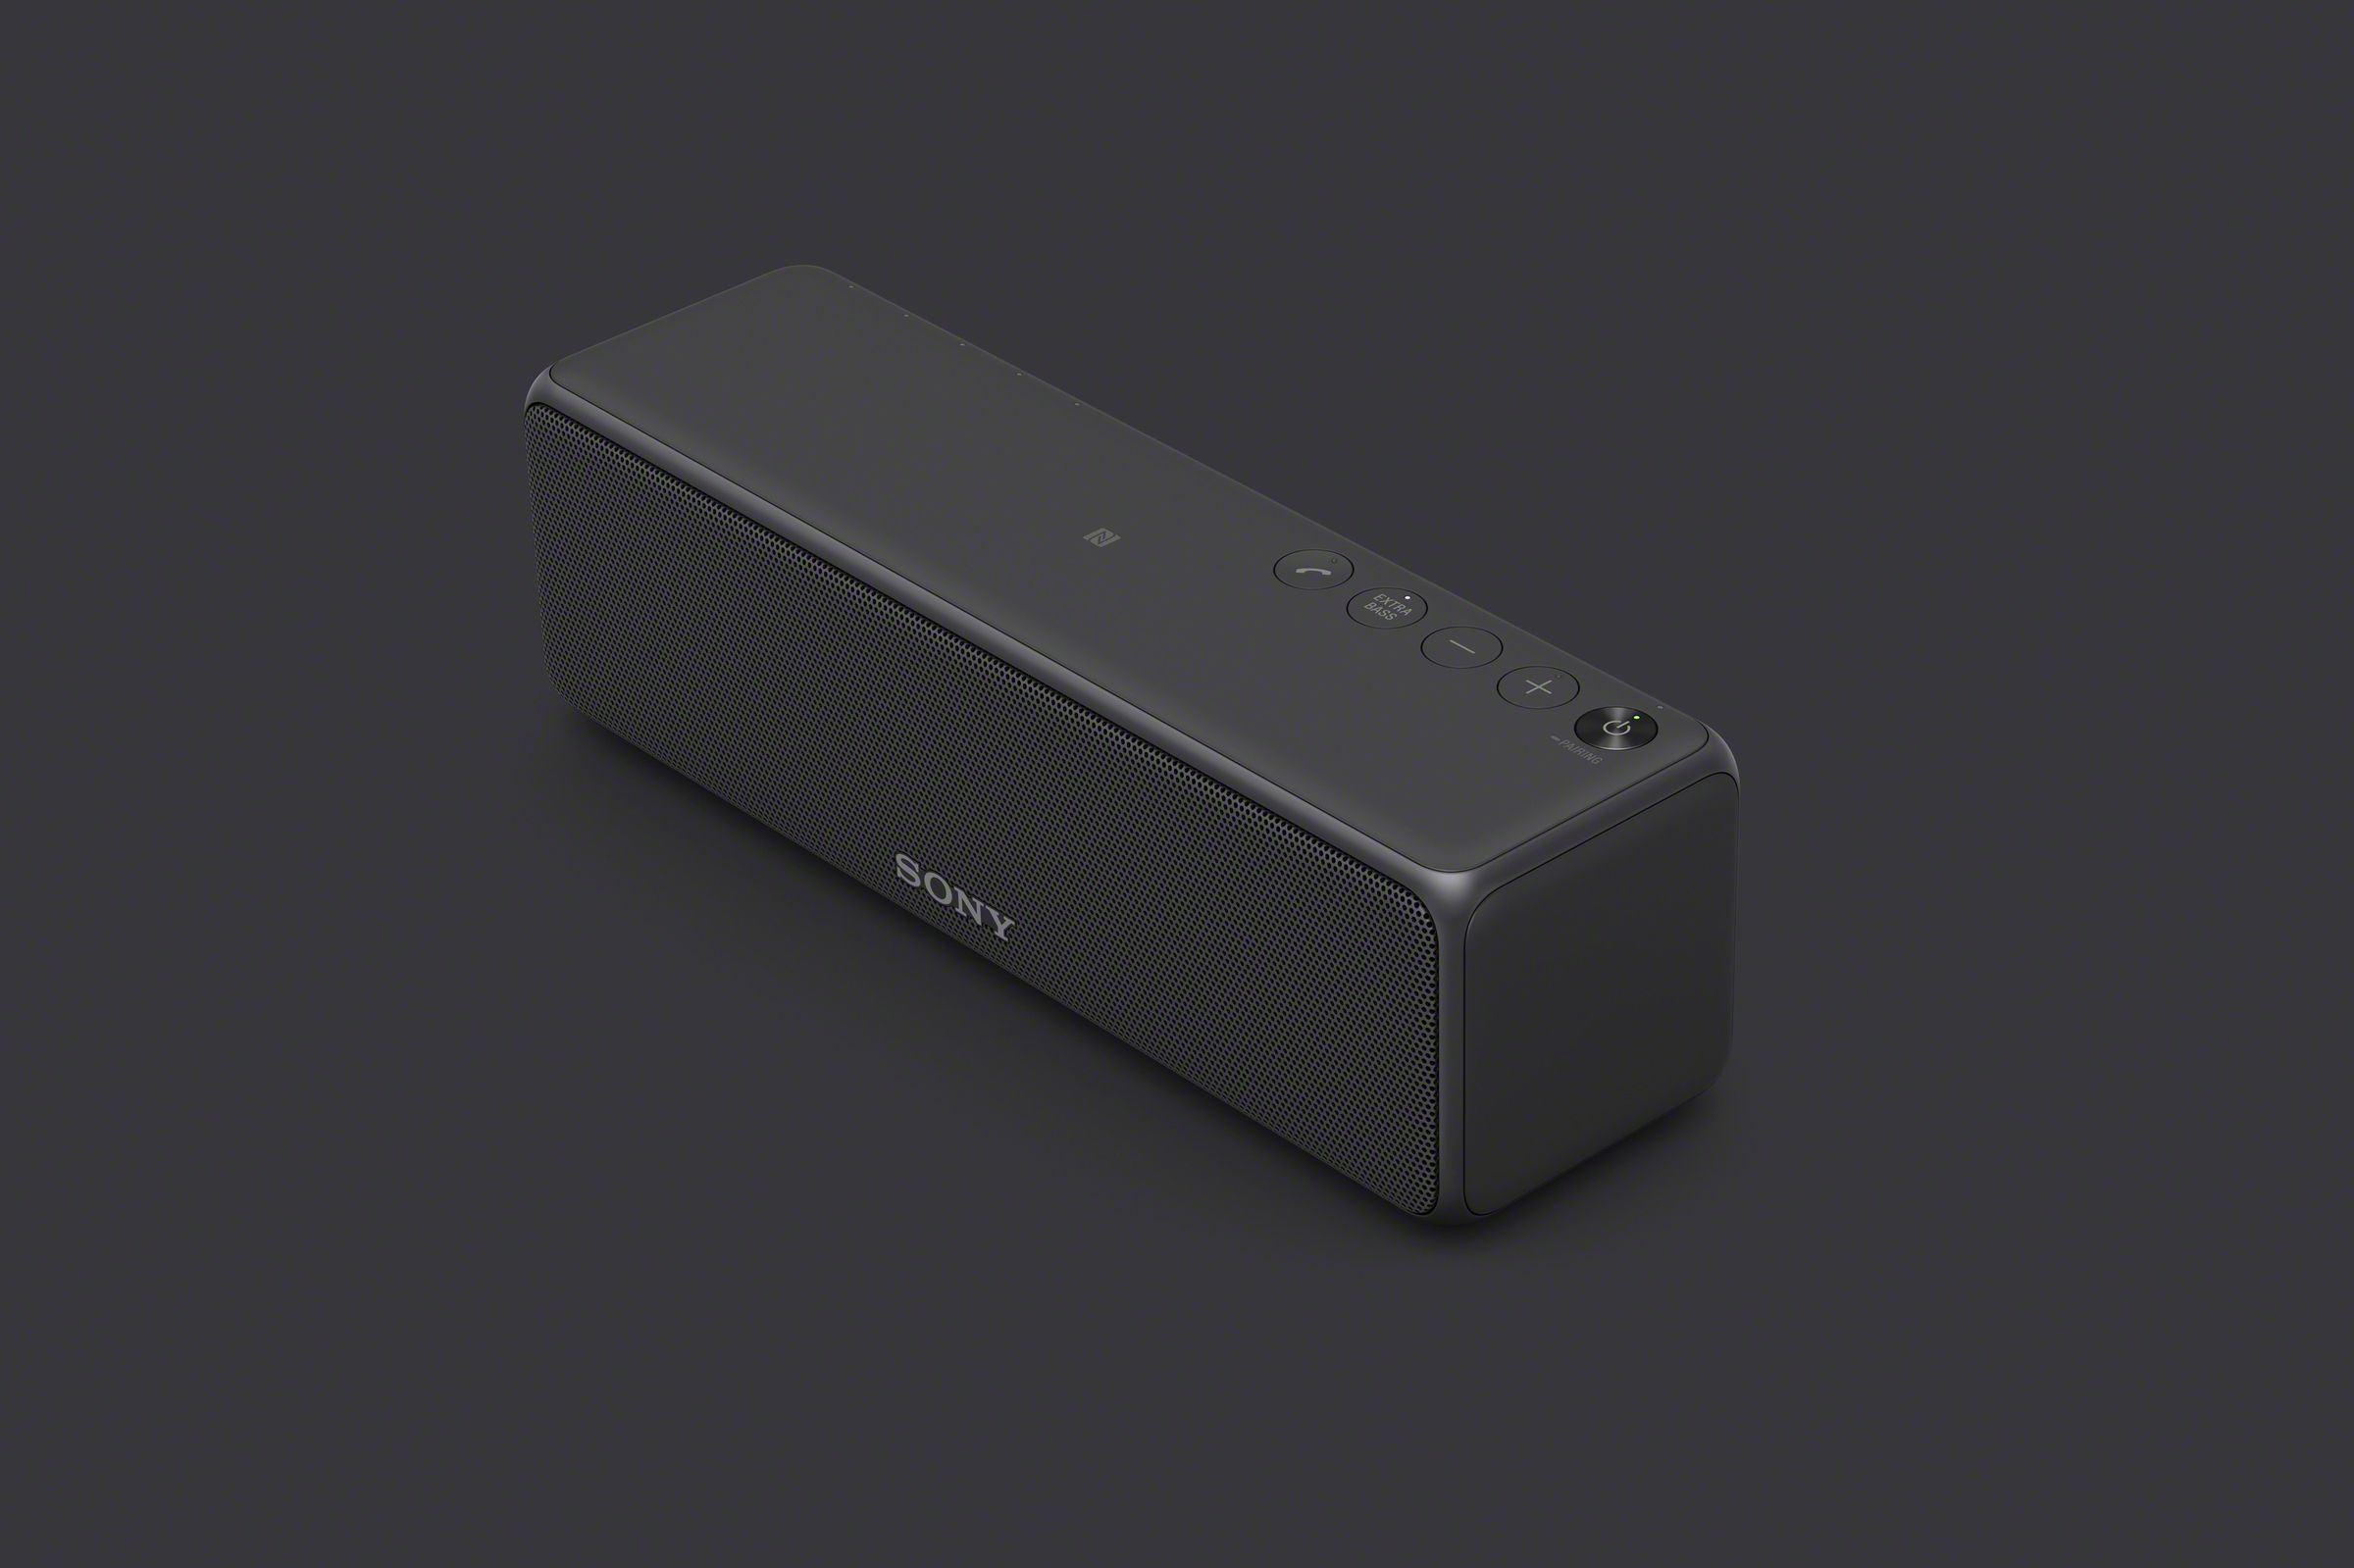 Sony's wireless speakers at CES 2016